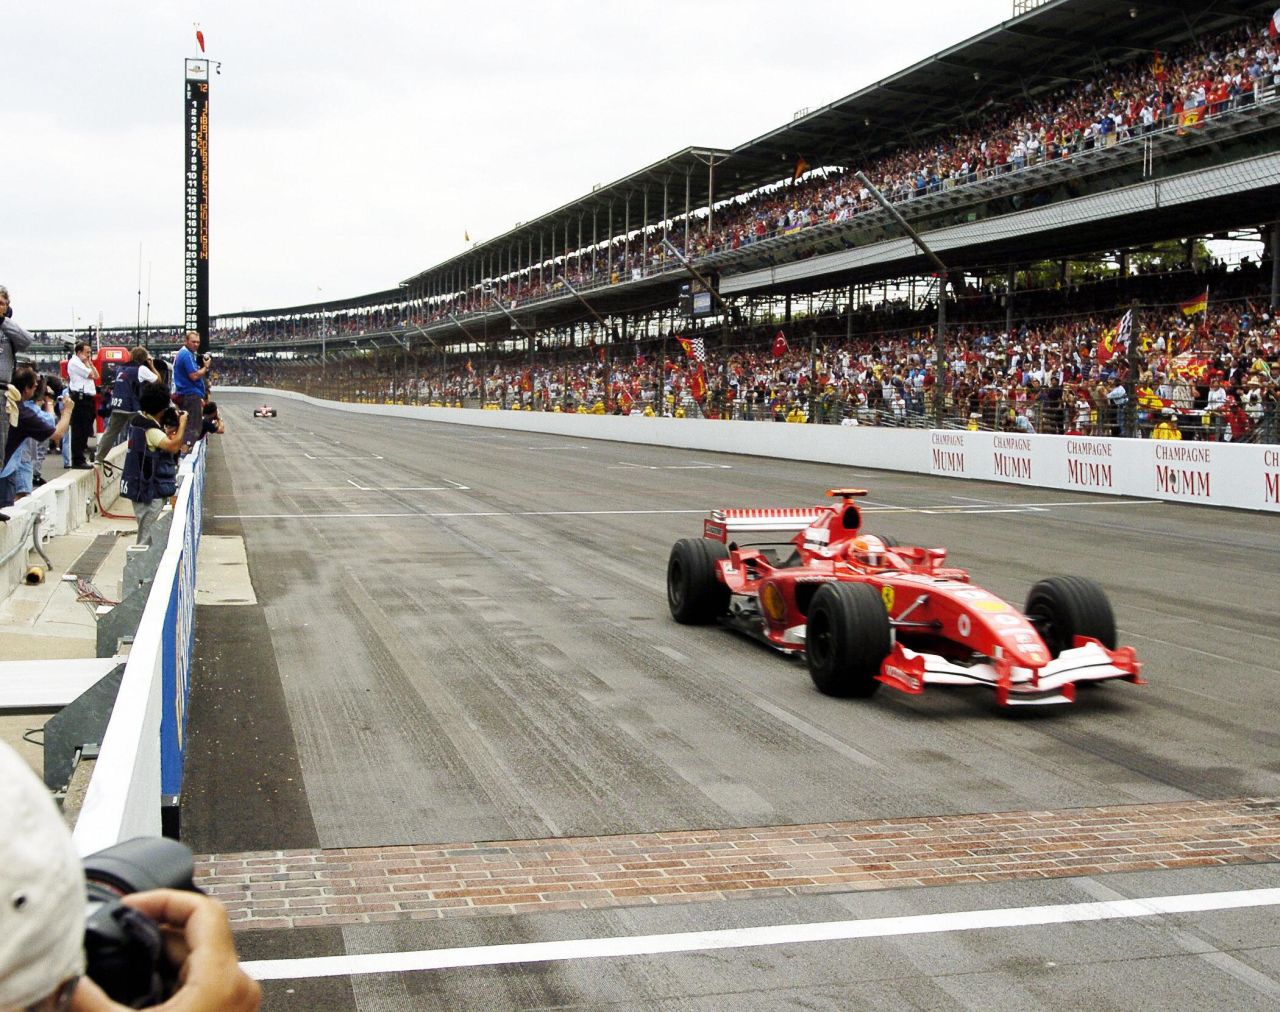 The US Grand Prix at Indianapolis in 2005 was won by Michael Schumacher. But the race is remembered less for his victory, than the number of starters -- just six cars, rather than the normal 20.